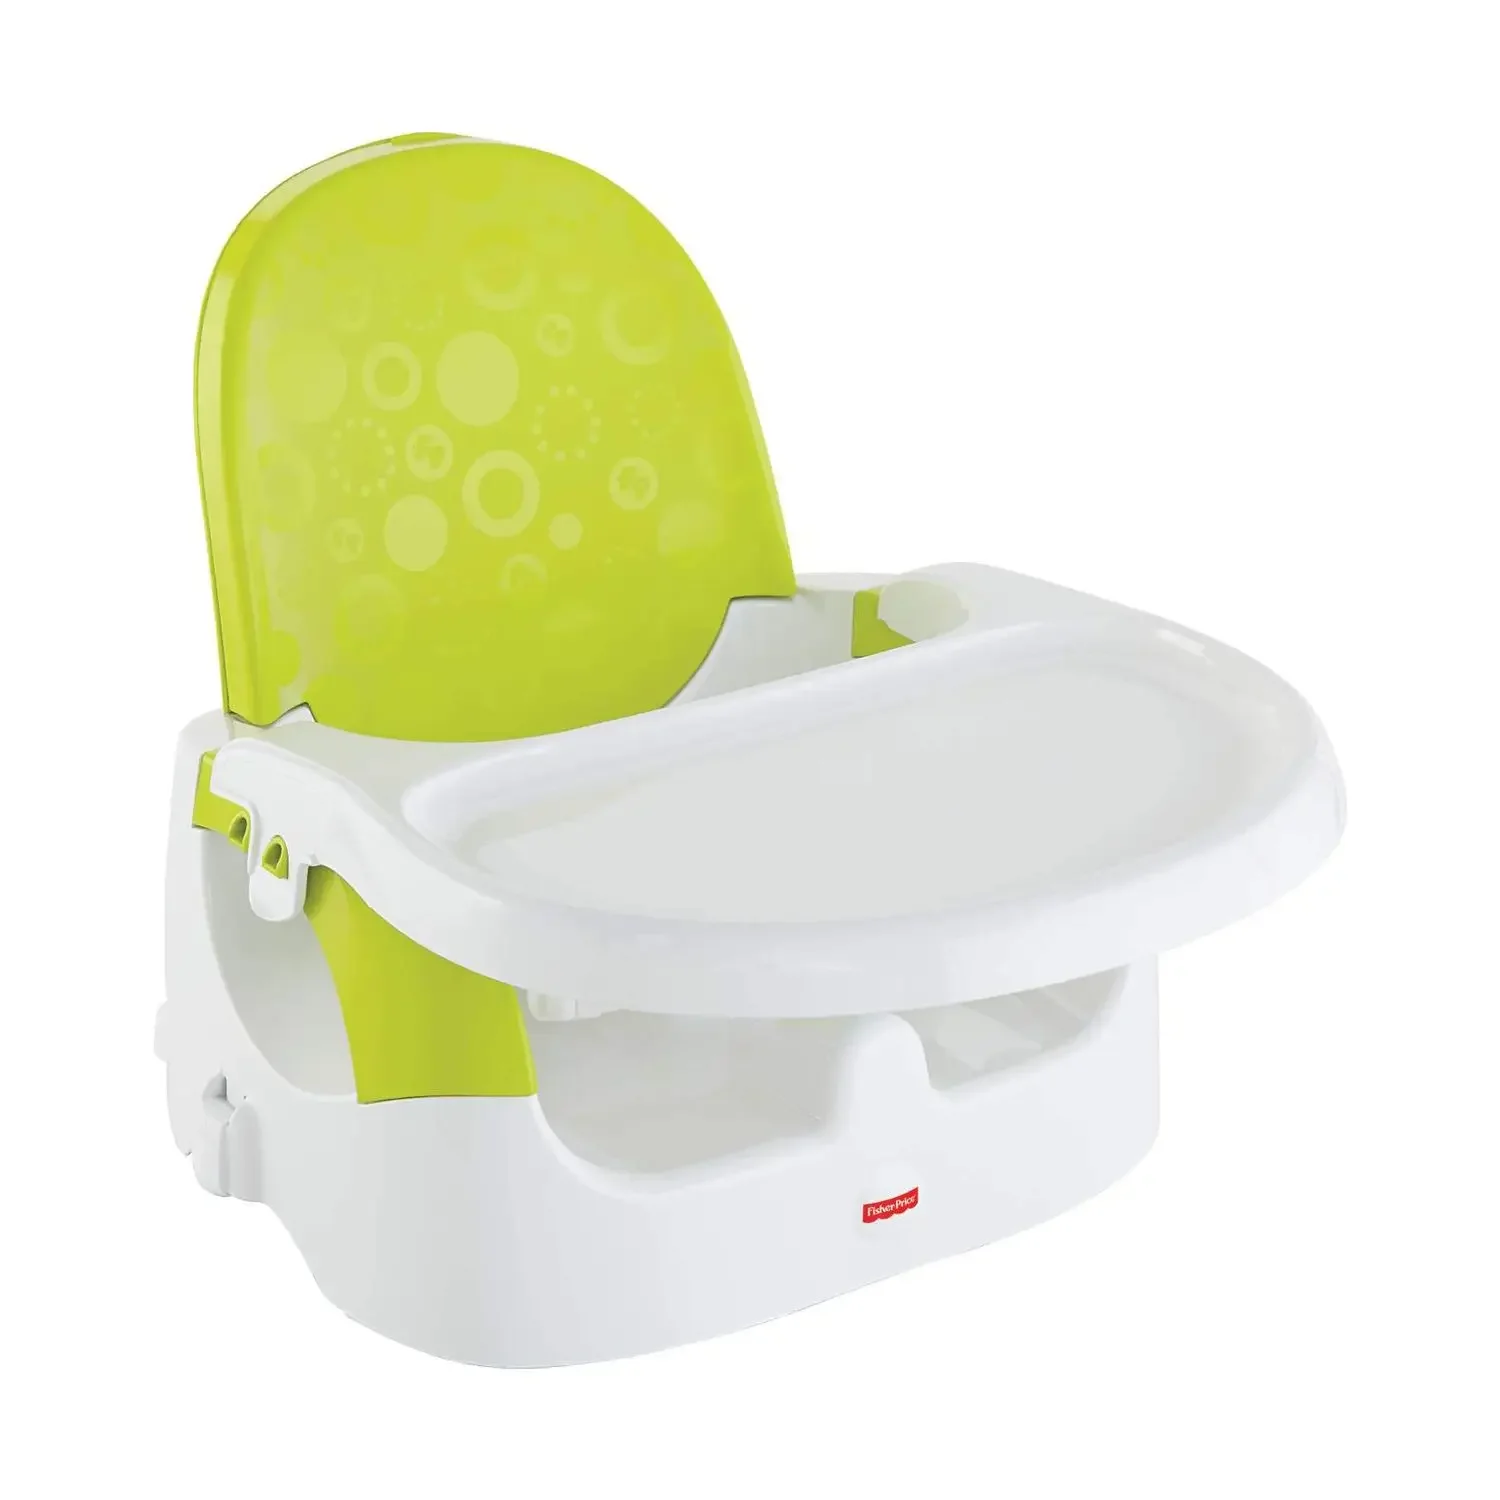 [Ready Stock] Fisher Price Quick-Clean 'n Go Portable Booster for Children Kids